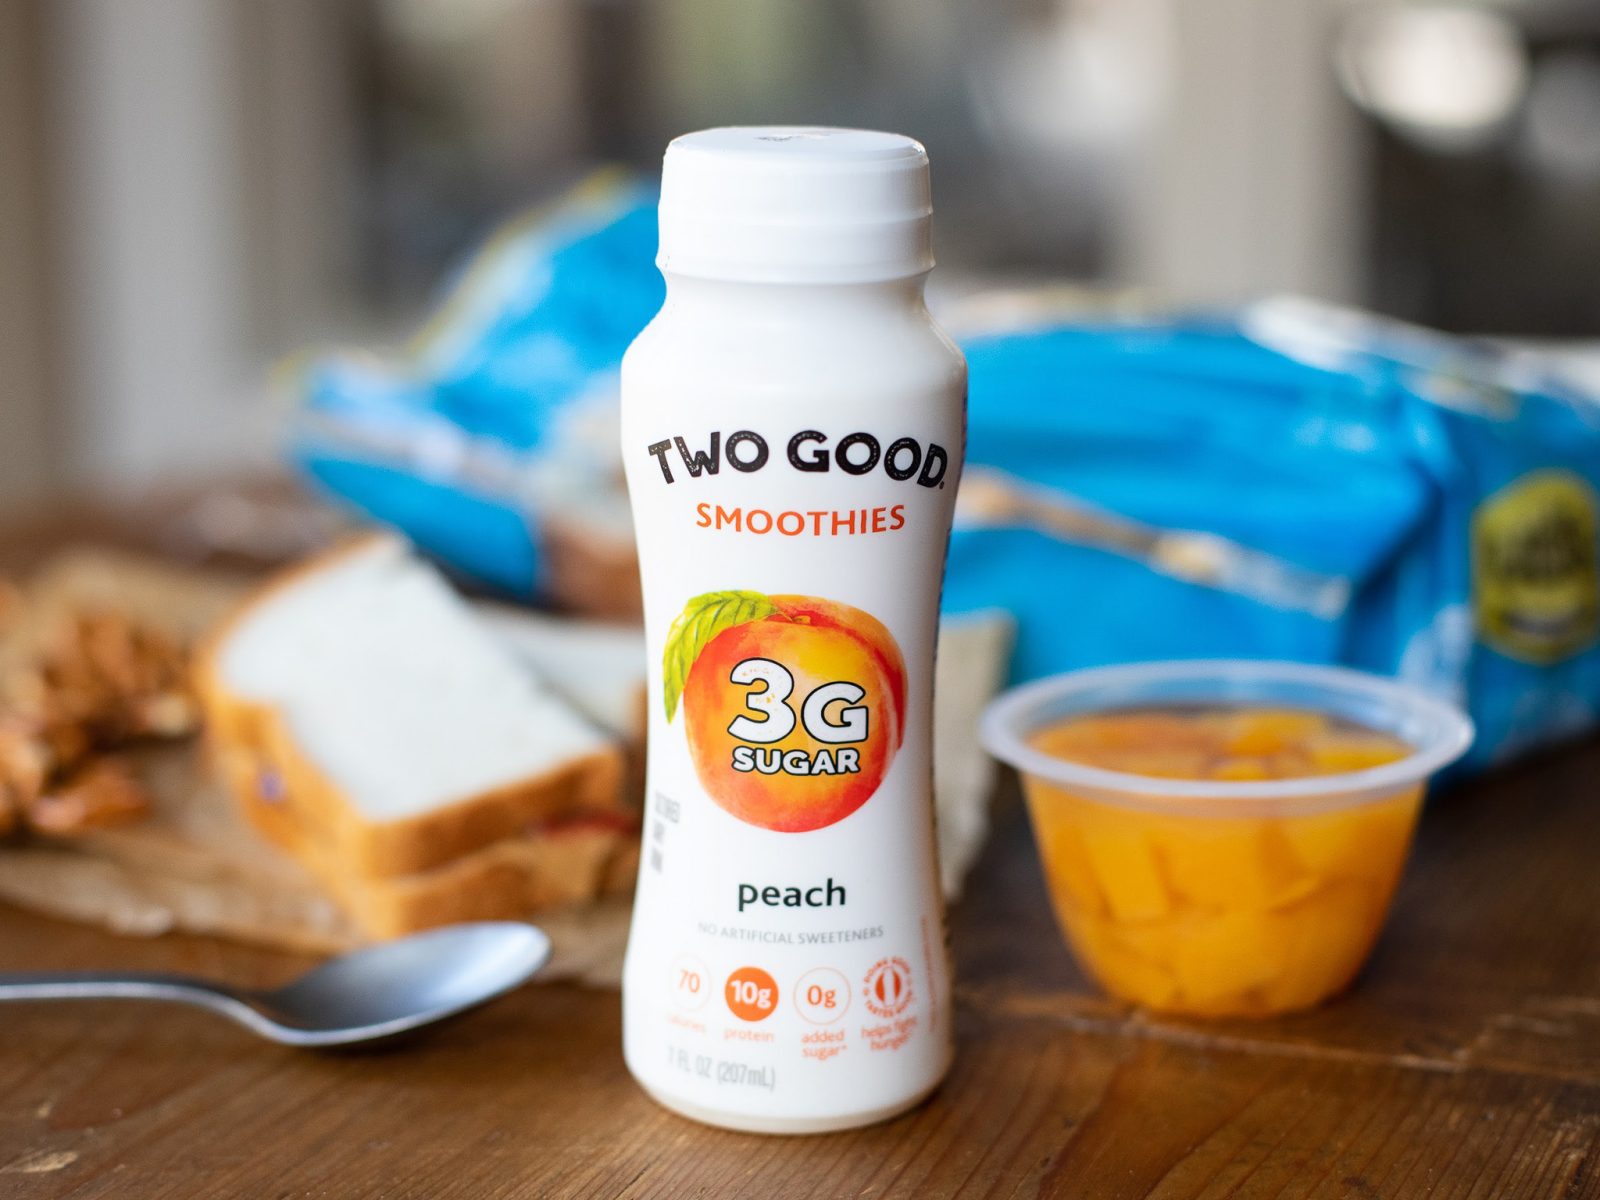 Get Two Good Smoothies For As Low As 44¢ At Kroger